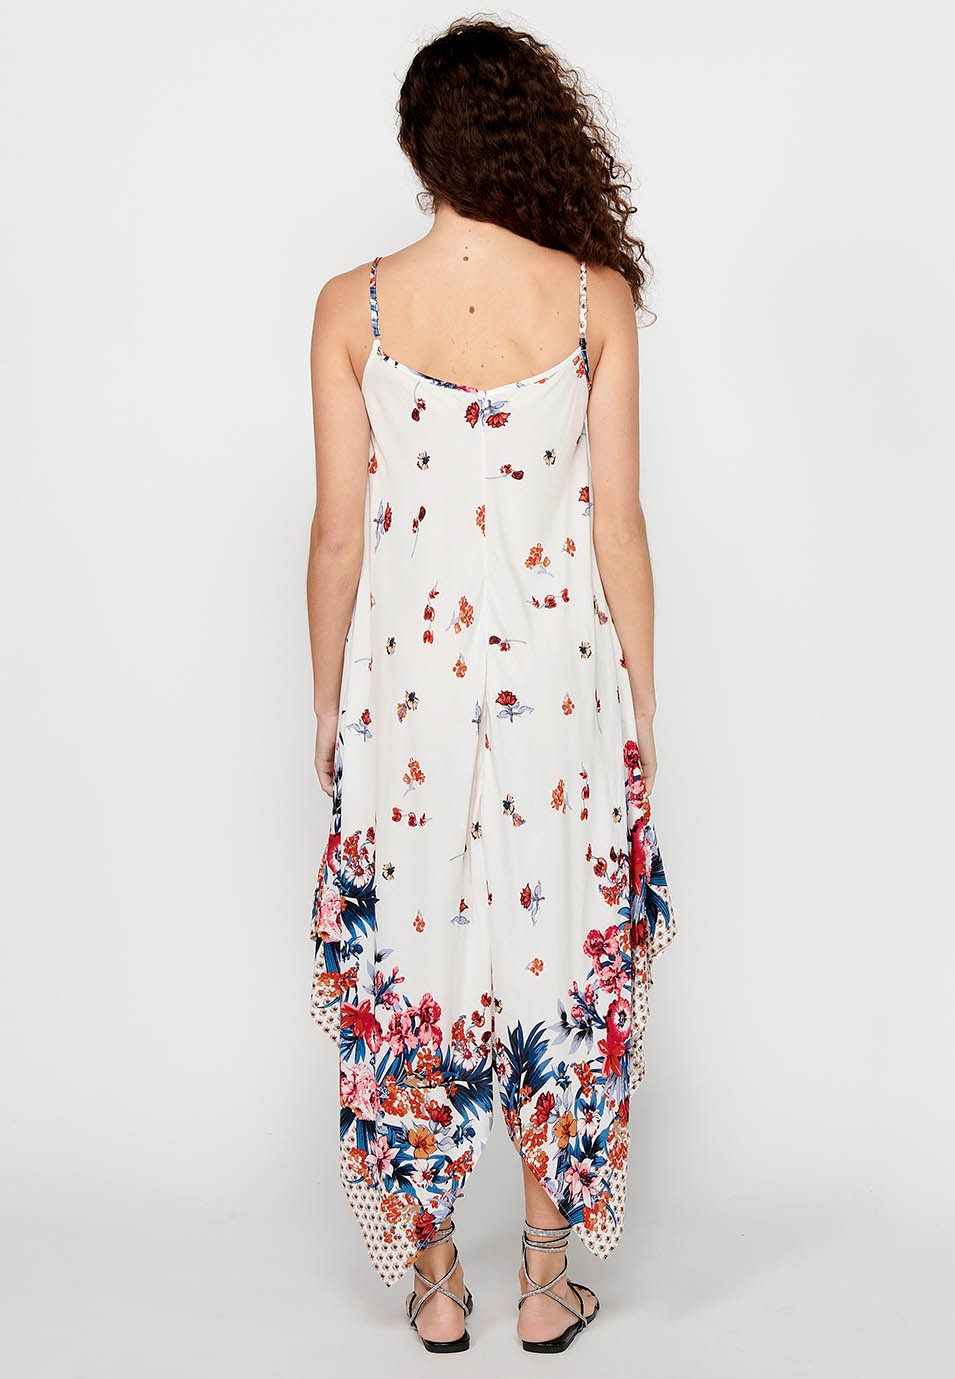 Strap Dress with V-neckline and White Floral Print for Women 7